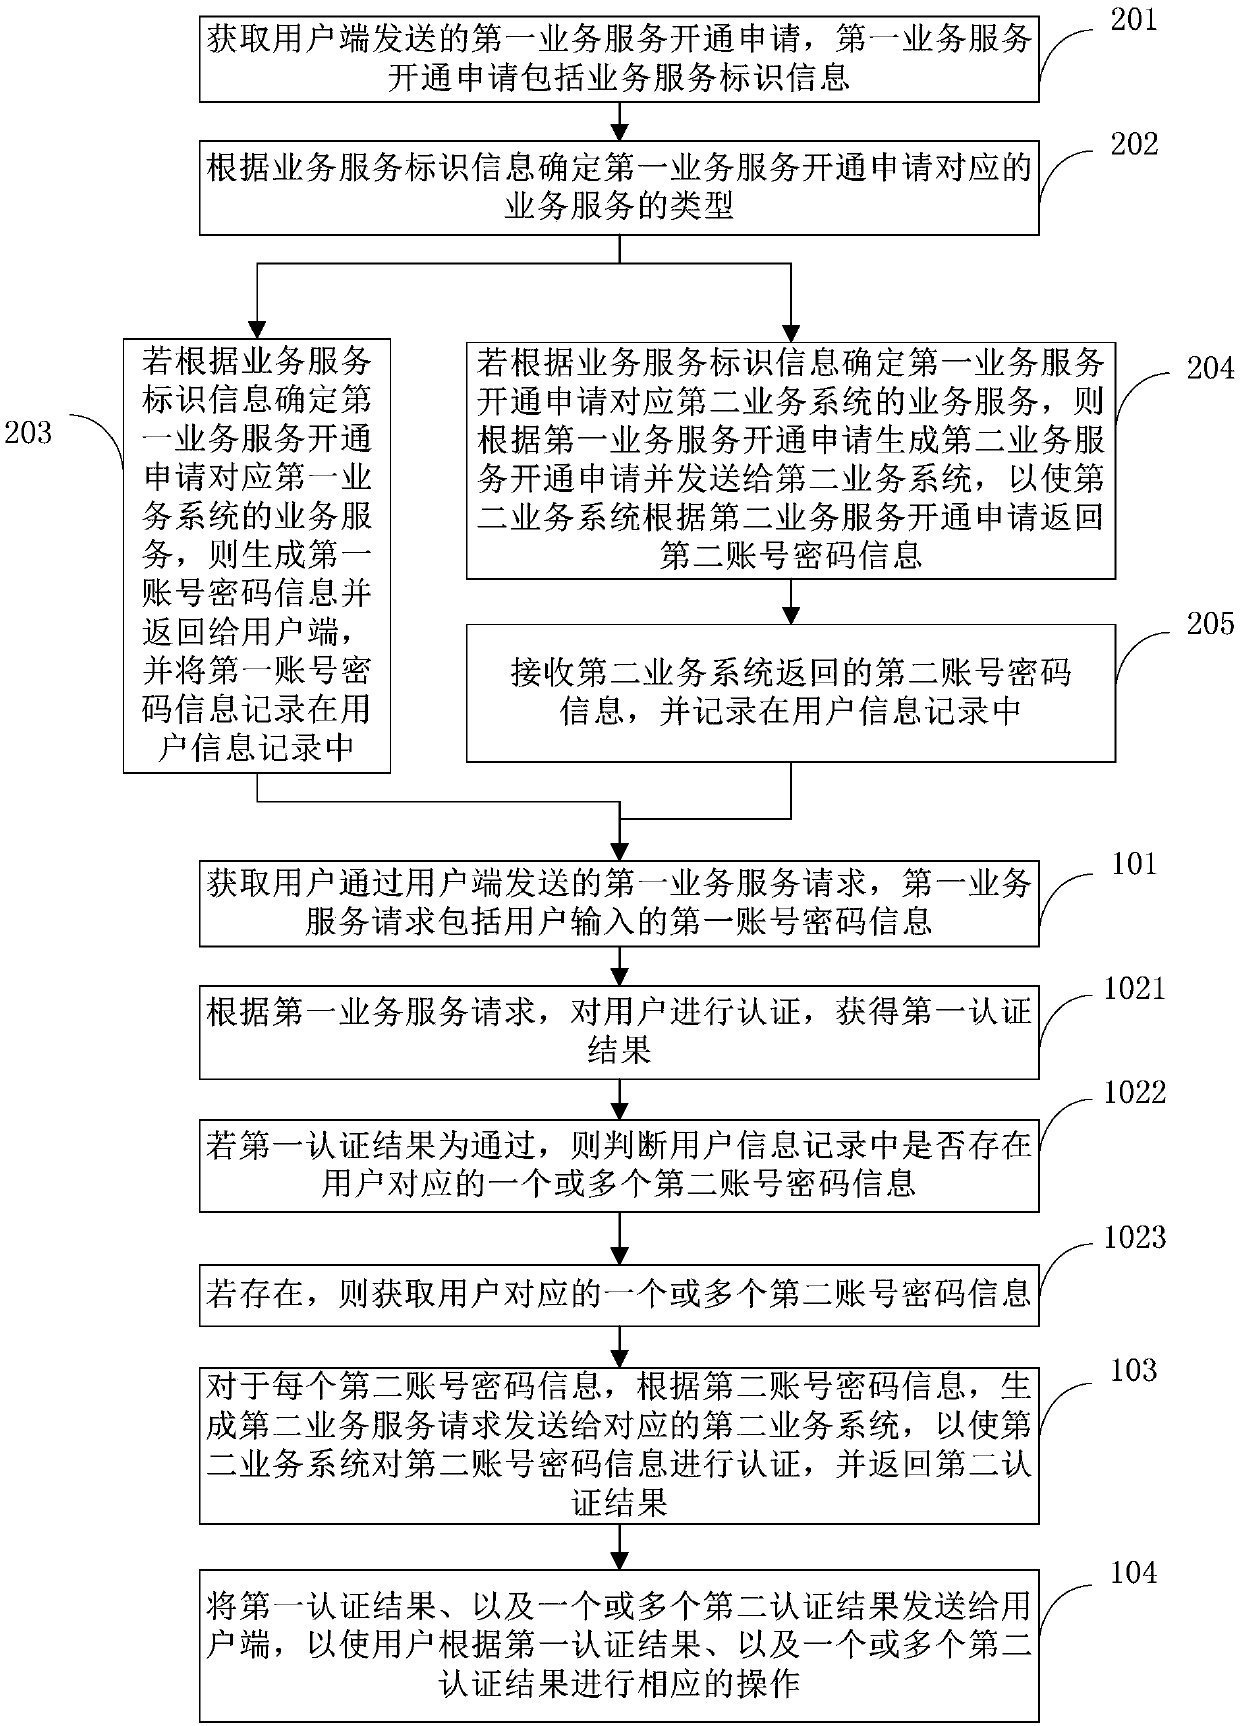 Single sign-on multiple authentication processing method and device